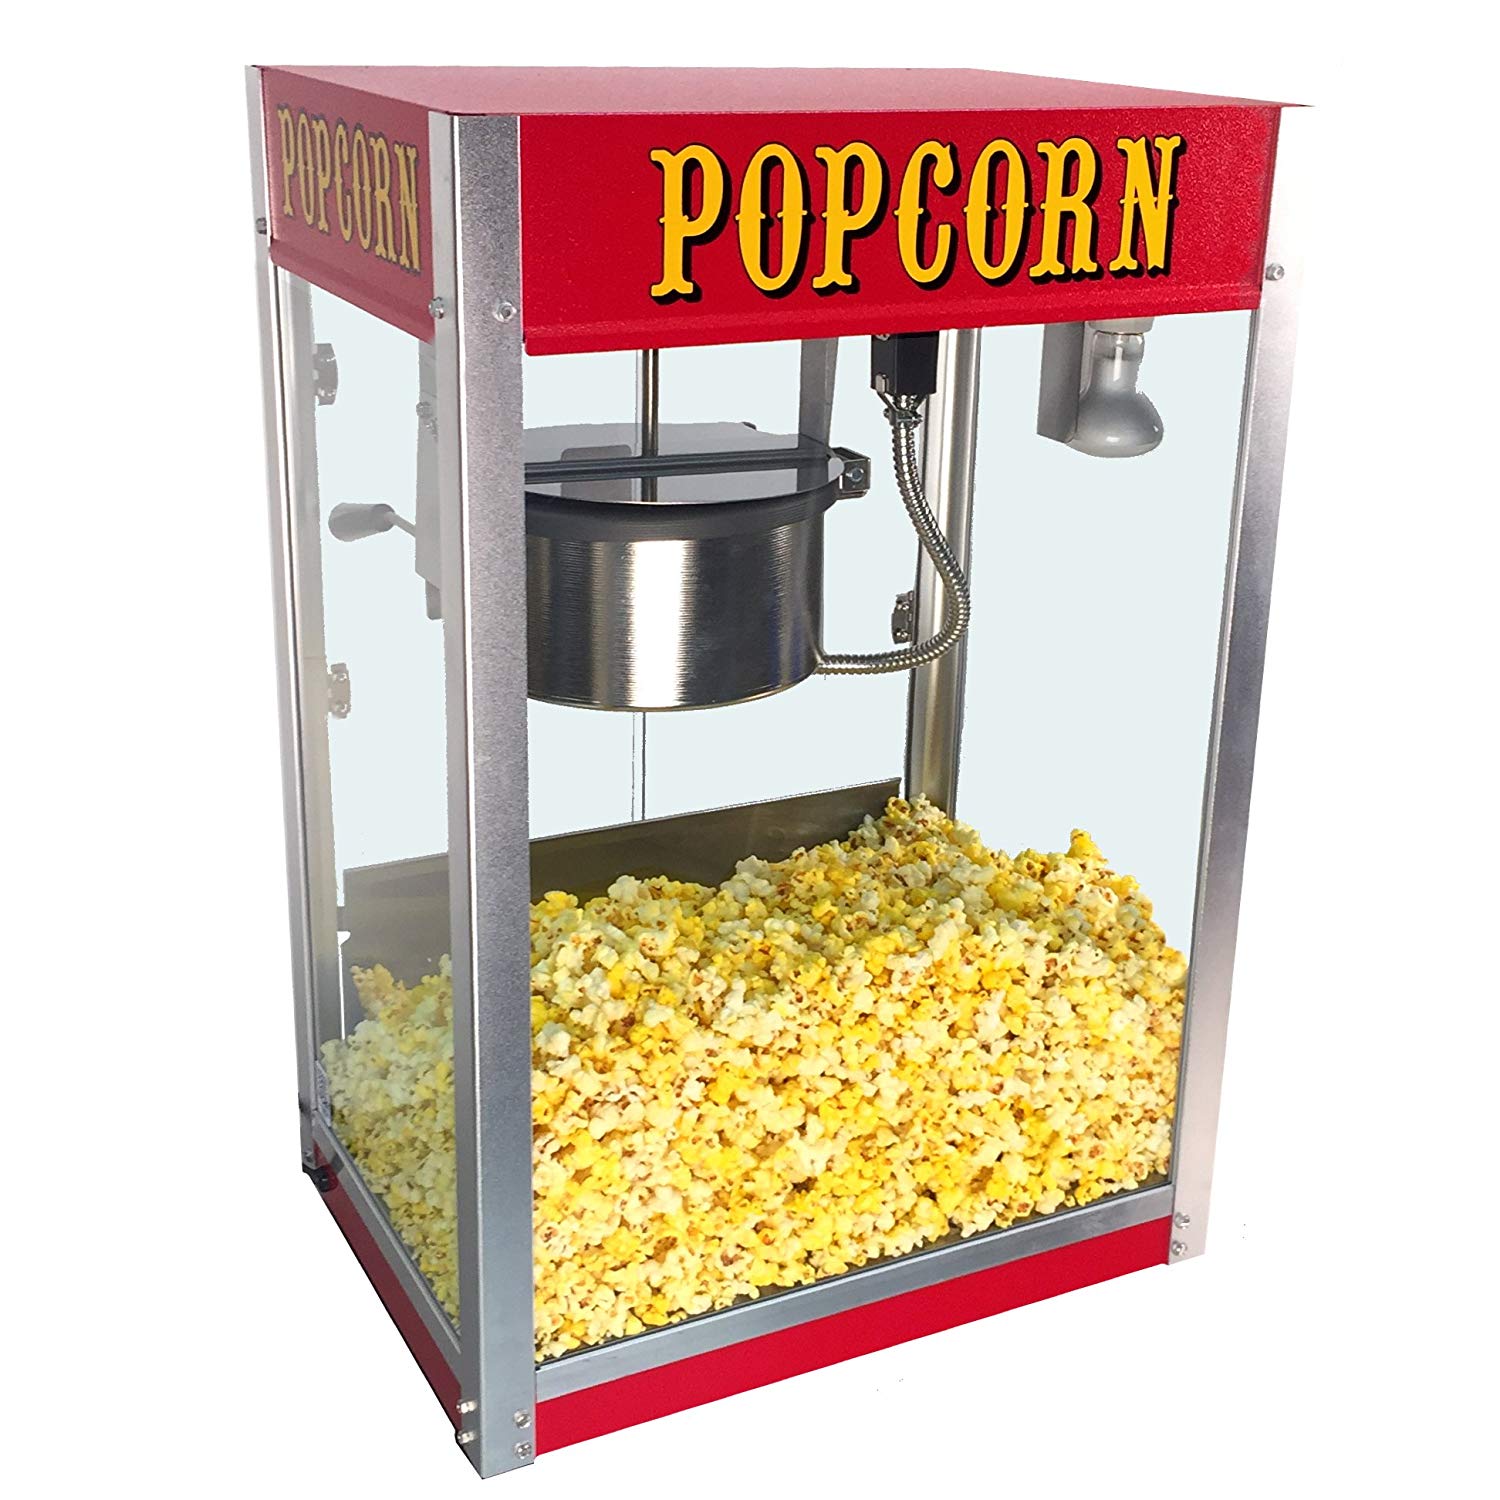 Paragon Theater Pop 8 Ounce Popcorn Machine for Professional Concessionaires Requiring Commercial Quality High Output Popcorn Equipment